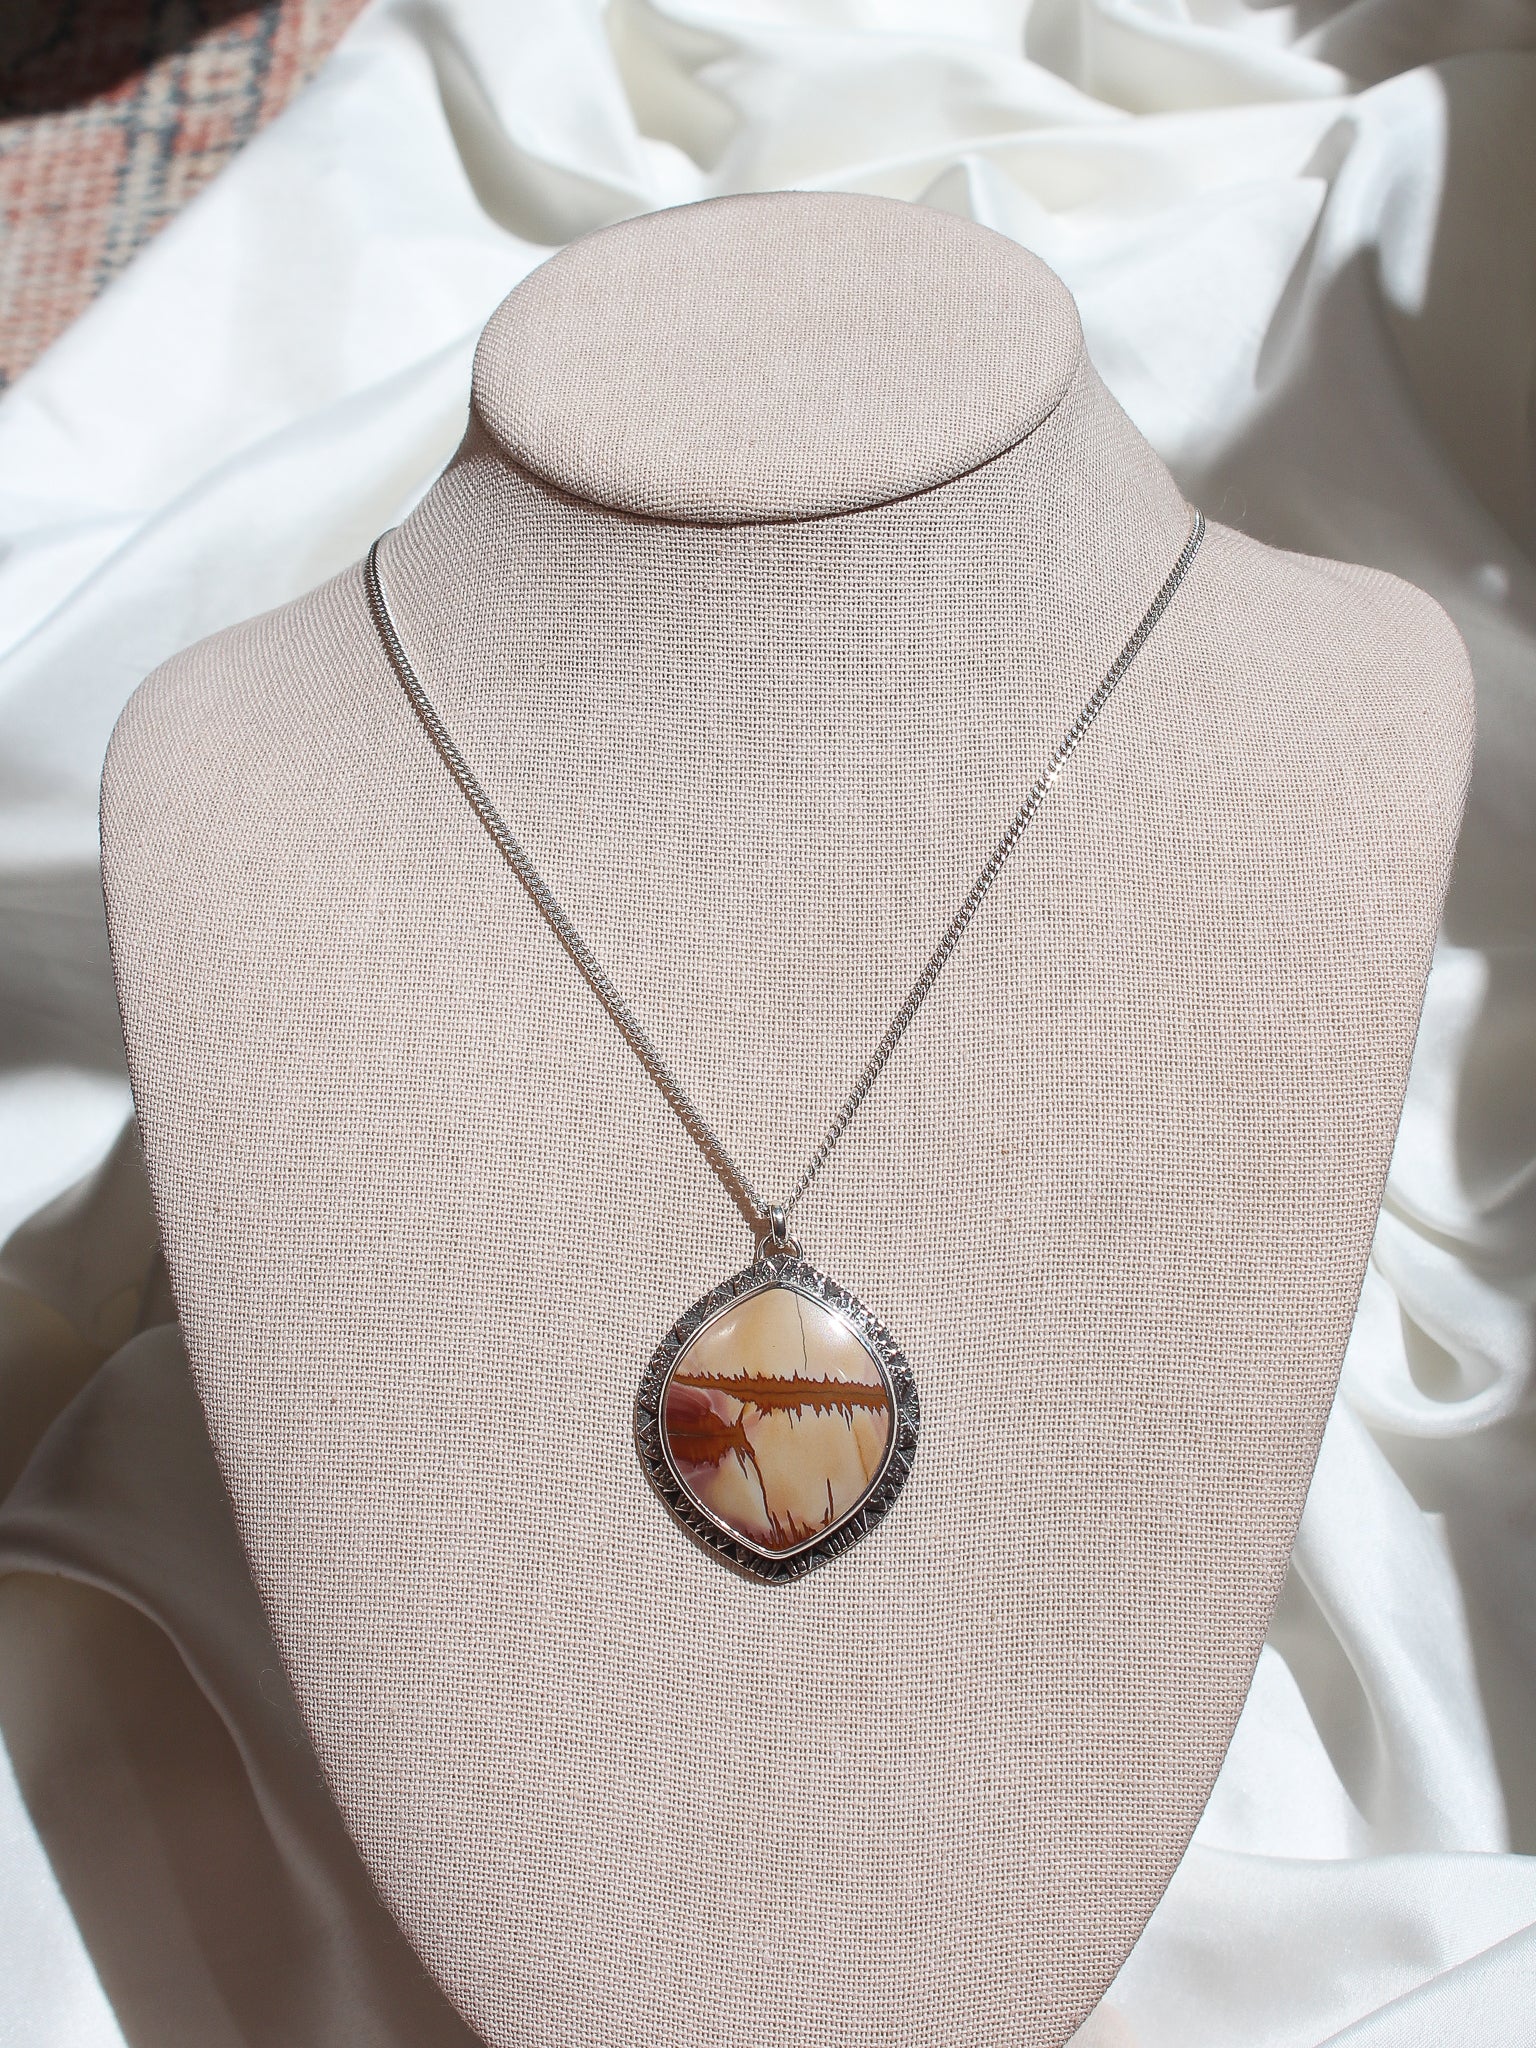 Handmade 925 sterling silver pendant with a unique red falcon jasper stone lily and William jewelry